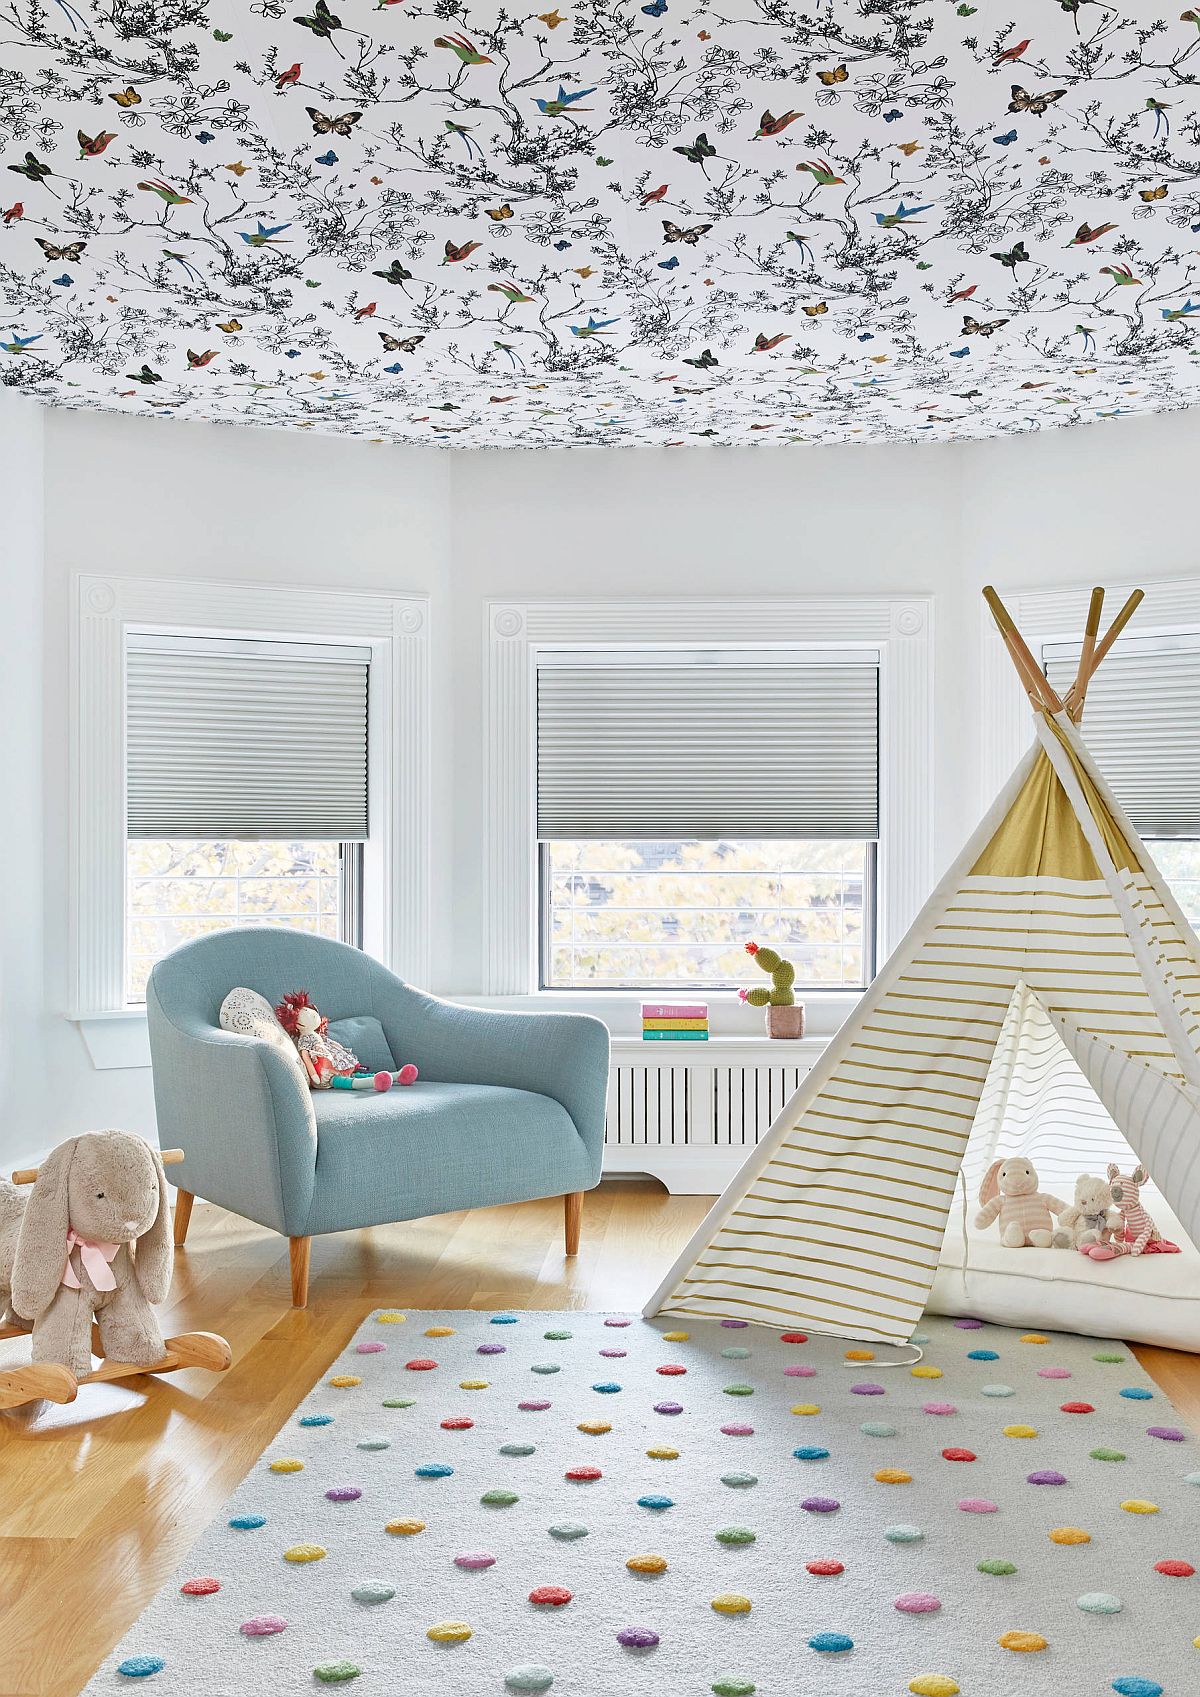 Vivacious butterfly and birds ceiling wallpaper fills this girls' room with fun pattern